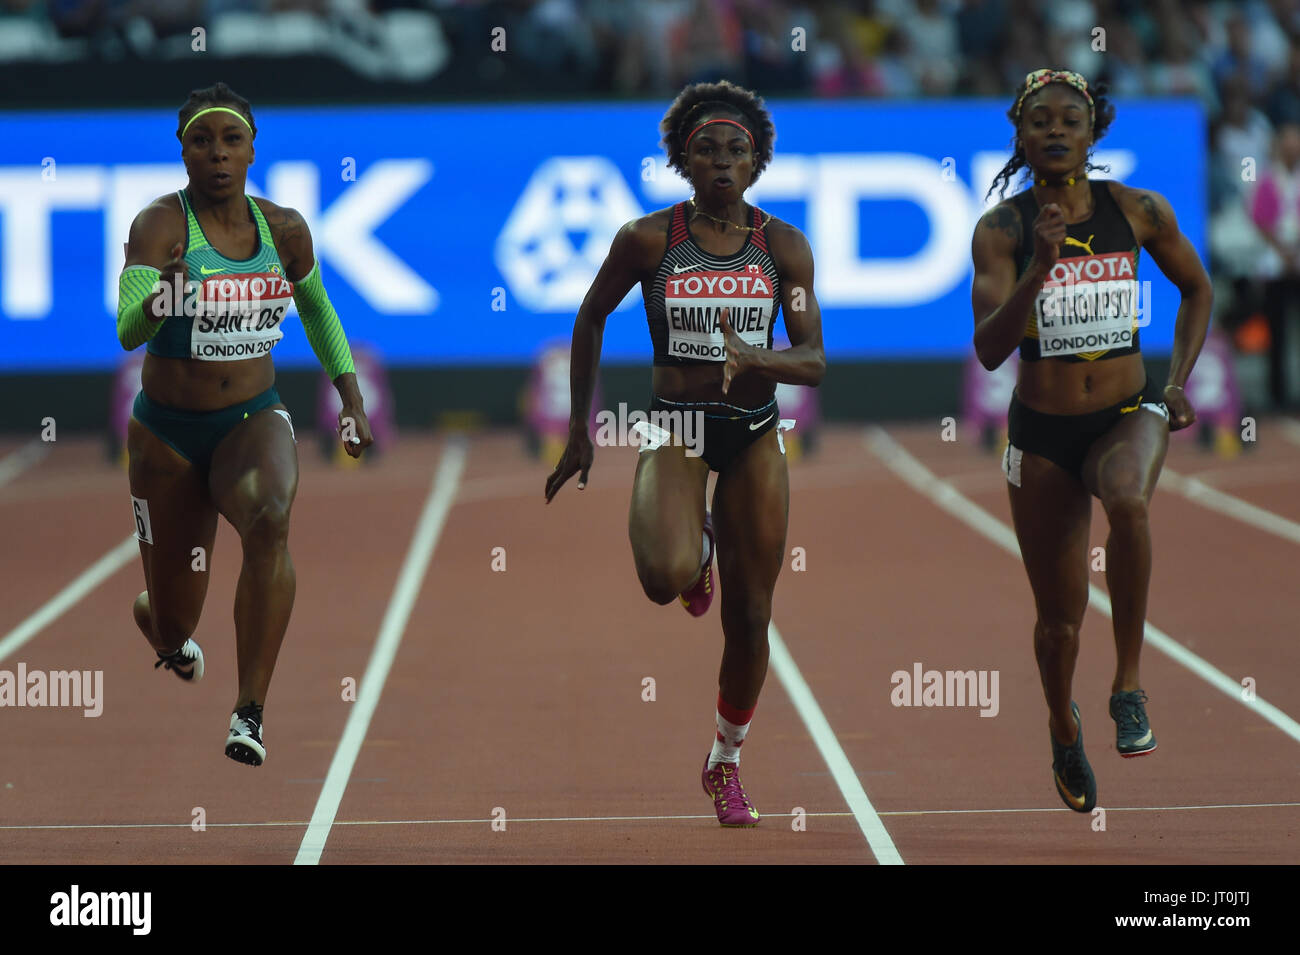 London, UK. 6th Aug, 2017. Elaine THOMPSON, Jamaica, and Rosangela SANTOS, Brazil, and Crystal EMMANUEL, Canada, during 100 meter semifinal in London on August 6, 2017 at the 2017 IAAF World Championships athletics. Credit: Ulrik Pedersen/Alamy Live News Stock Photo